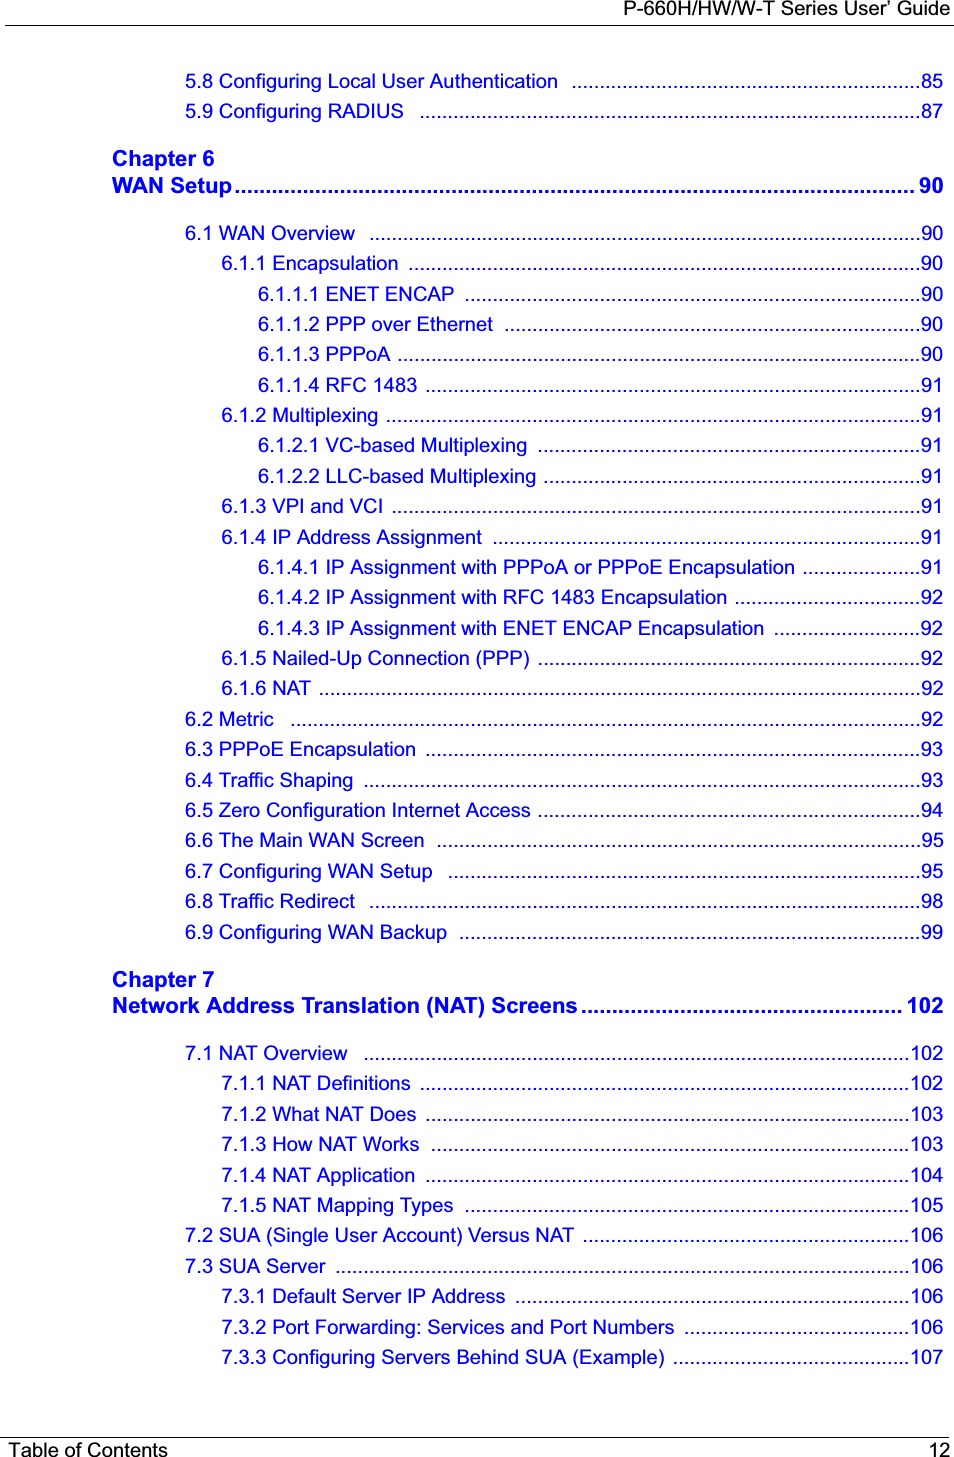 P-660H/HW/W-T Series User’ GuideTable of Contents 125.8 Configuring Local User Authentication  ..............................................................855.9 Configuring RADIUS   .........................................................................................87Chapter 6WAN Setup.............................................................................................................. 906.1 WAN Overview   ..................................................................................................906.1.1 Encapsulation  ...........................................................................................906.1.1.1 ENET ENCAP  .................................................................................906.1.1.2 PPP over Ethernet  ..........................................................................906.1.1.3 PPPoA .............................................................................................906.1.1.4 RFC 1483 ........................................................................................916.1.2 Multiplexing ...............................................................................................916.1.2.1 VC-based Multiplexing  ....................................................................916.1.2.2 LLC-based Multiplexing ...................................................................916.1.3 VPI and VCI  ..............................................................................................916.1.4 IP Address Assignment  ............................................................................916.1.4.1 IP Assignment with PPPoA or PPPoE Encapsulation .....................916.1.4.2 IP Assignment with RFC 1483 Encapsulation .................................926.1.4.3 IP Assignment with ENET ENCAP Encapsulation ..........................926.1.5 Nailed-Up Connection (PPP) ....................................................................926.1.6 NAT ...........................................................................................................926.2 Metric   ................................................................................................................926.3 PPPoE Encapsulation  ........................................................................................936.4 Traffic Shaping  ...................................................................................................936.5 Zero Configuration Internet Access ....................................................................946.6 The Main WAN Screen  ......................................................................................956.7 Configuring WAN Setup   ....................................................................................956.8 Traffic Redirect   ..................................................................................................986.9 Configuring WAN Backup  ..................................................................................99Chapter 7Network Address Translation (NAT) Screens.................................................... 1027.1 NAT Overview   .................................................................................................1027.1.1 NAT Definitions  .......................................................................................1027.1.2 What NAT Does  ......................................................................................1037.1.3 How NAT Works  .....................................................................................1037.1.4 NAT Application  ......................................................................................1047.1.5 NAT Mapping Types  ...............................................................................1057.2 SUA (Single User Account) Versus NAT  ..........................................................1067.3 SUA Server  ......................................................................................................1067.3.1 Default Server IP Address  ......................................................................1067.3.2 Port Forwarding: Services and Port Numbers  ........................................1067.3.3 Configuring Servers Behind SUA (Example)  ..........................................107